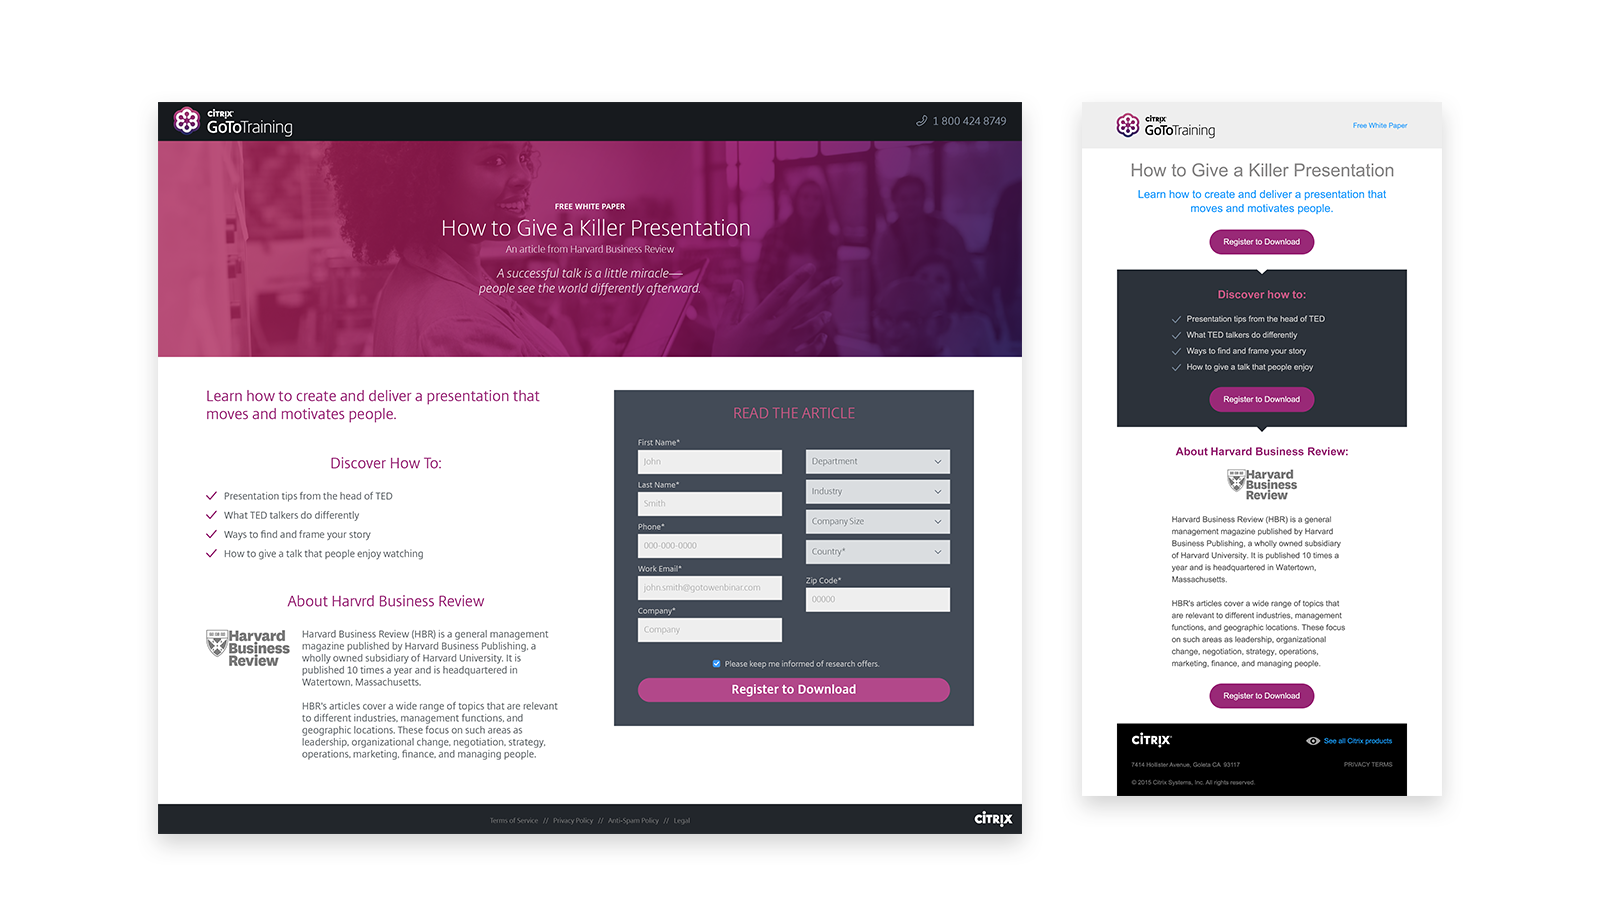 GoToTraining landing page and email templates